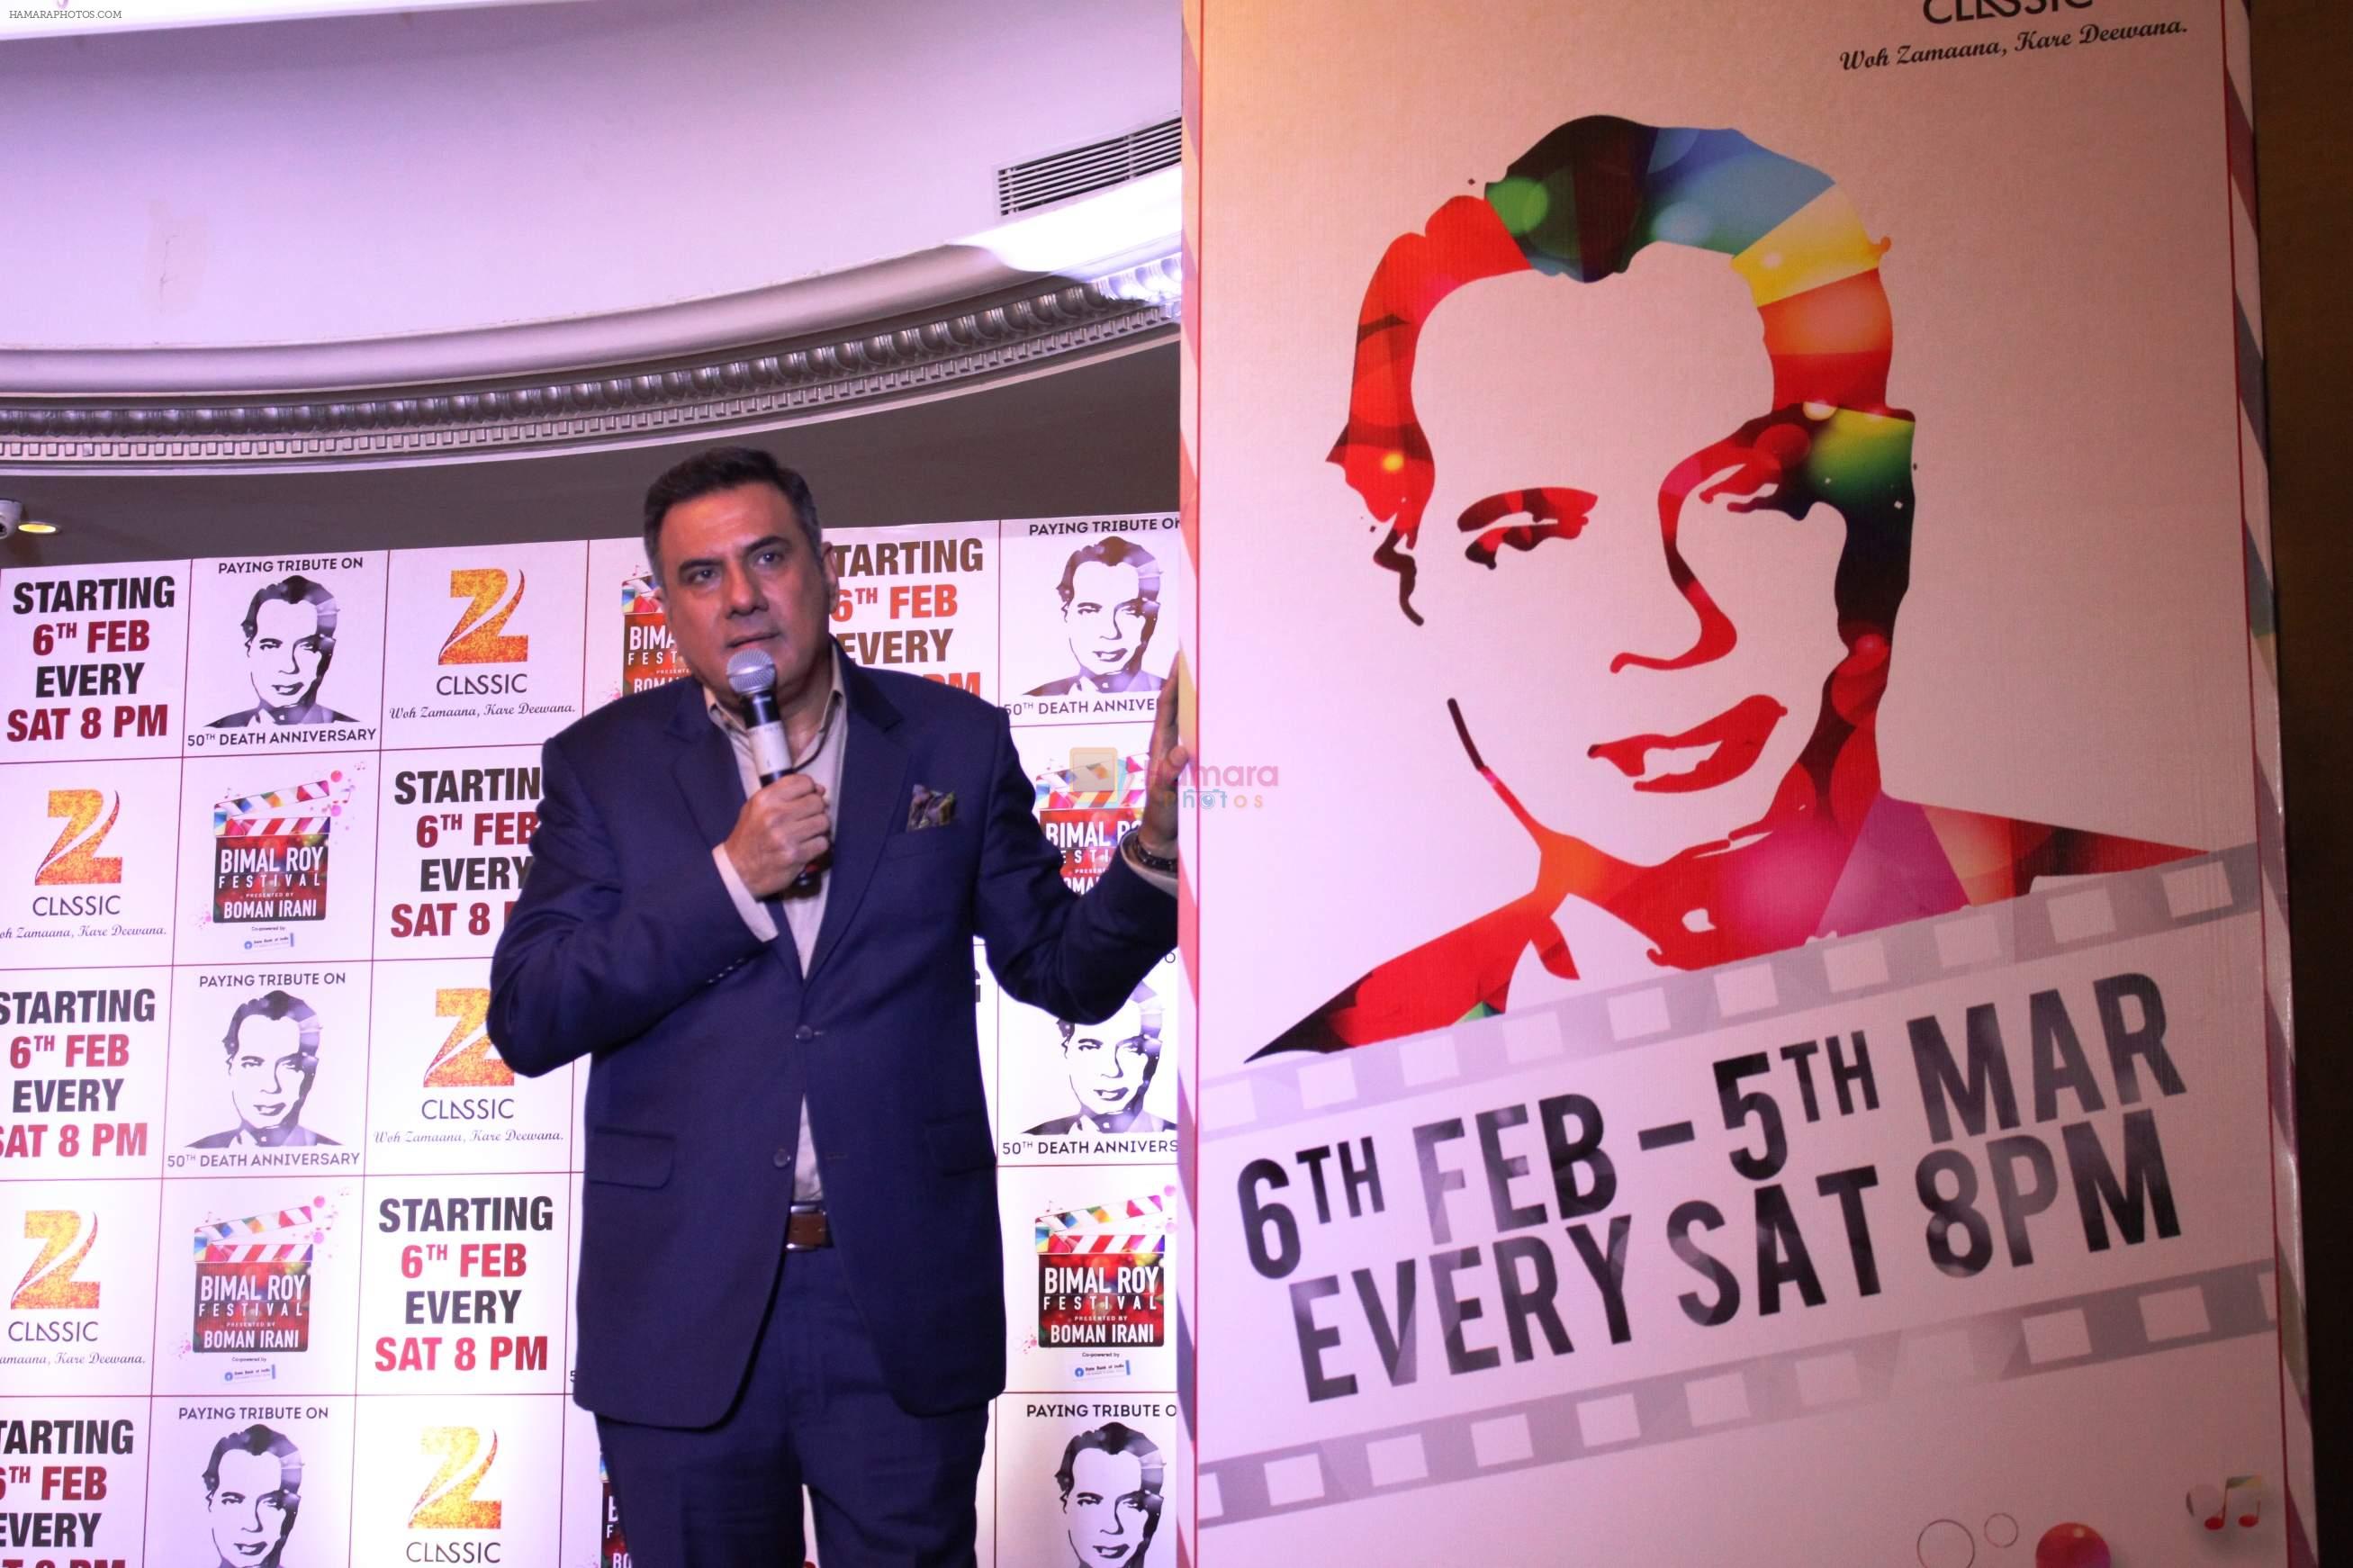 Boman Irani at the launch of Zee Classic's - _The Bimal Roy Festival presented by Boman Irani_ on 20th Jan 2016